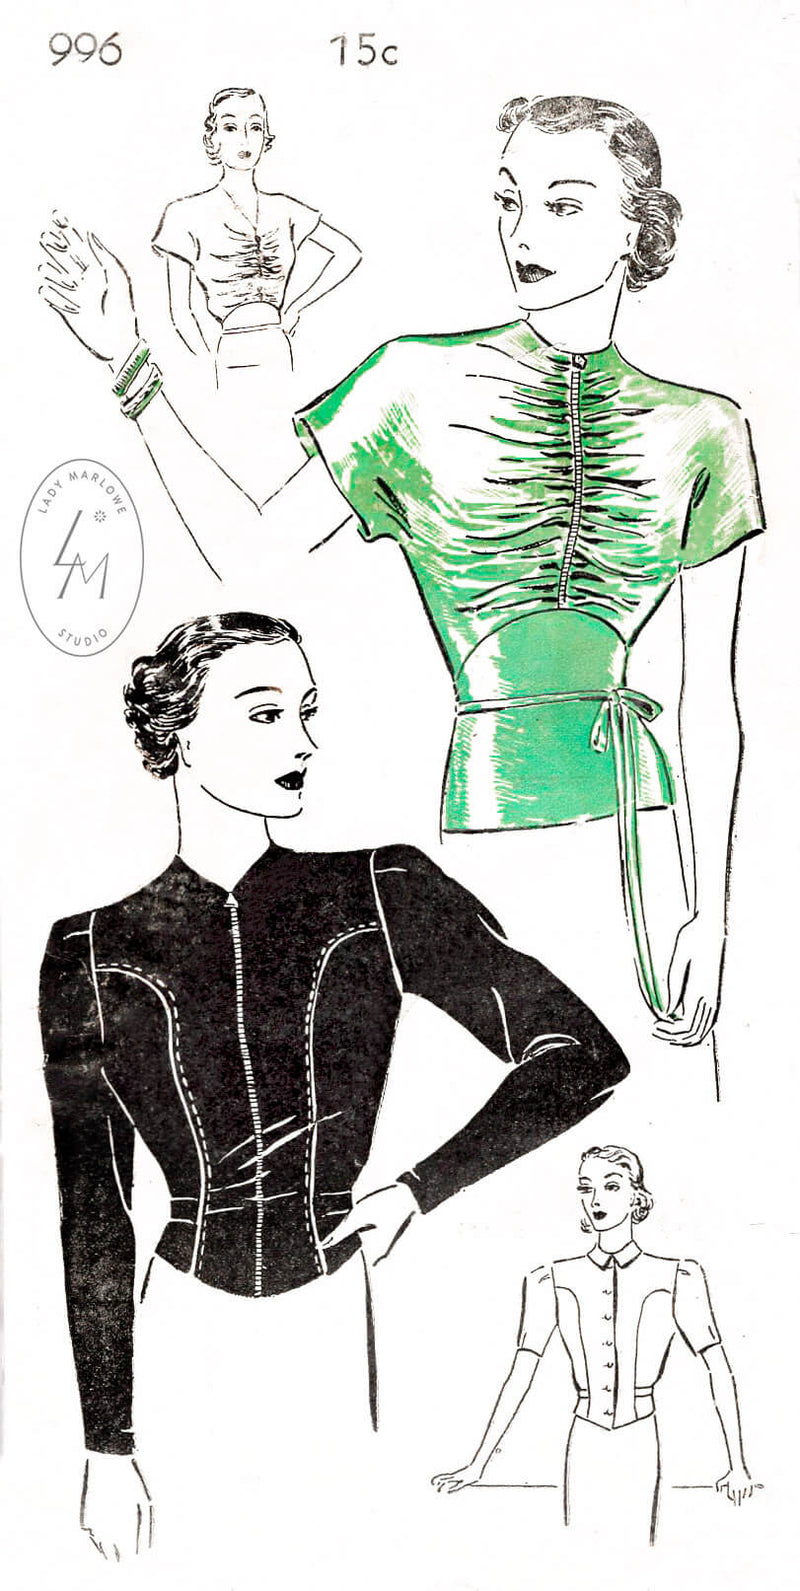 New York Pattern 996 set of blouses in 4 styles, front ruching, girdle waist, long sleeves, short puff sleeves. Vintage sewing pattern reproduction